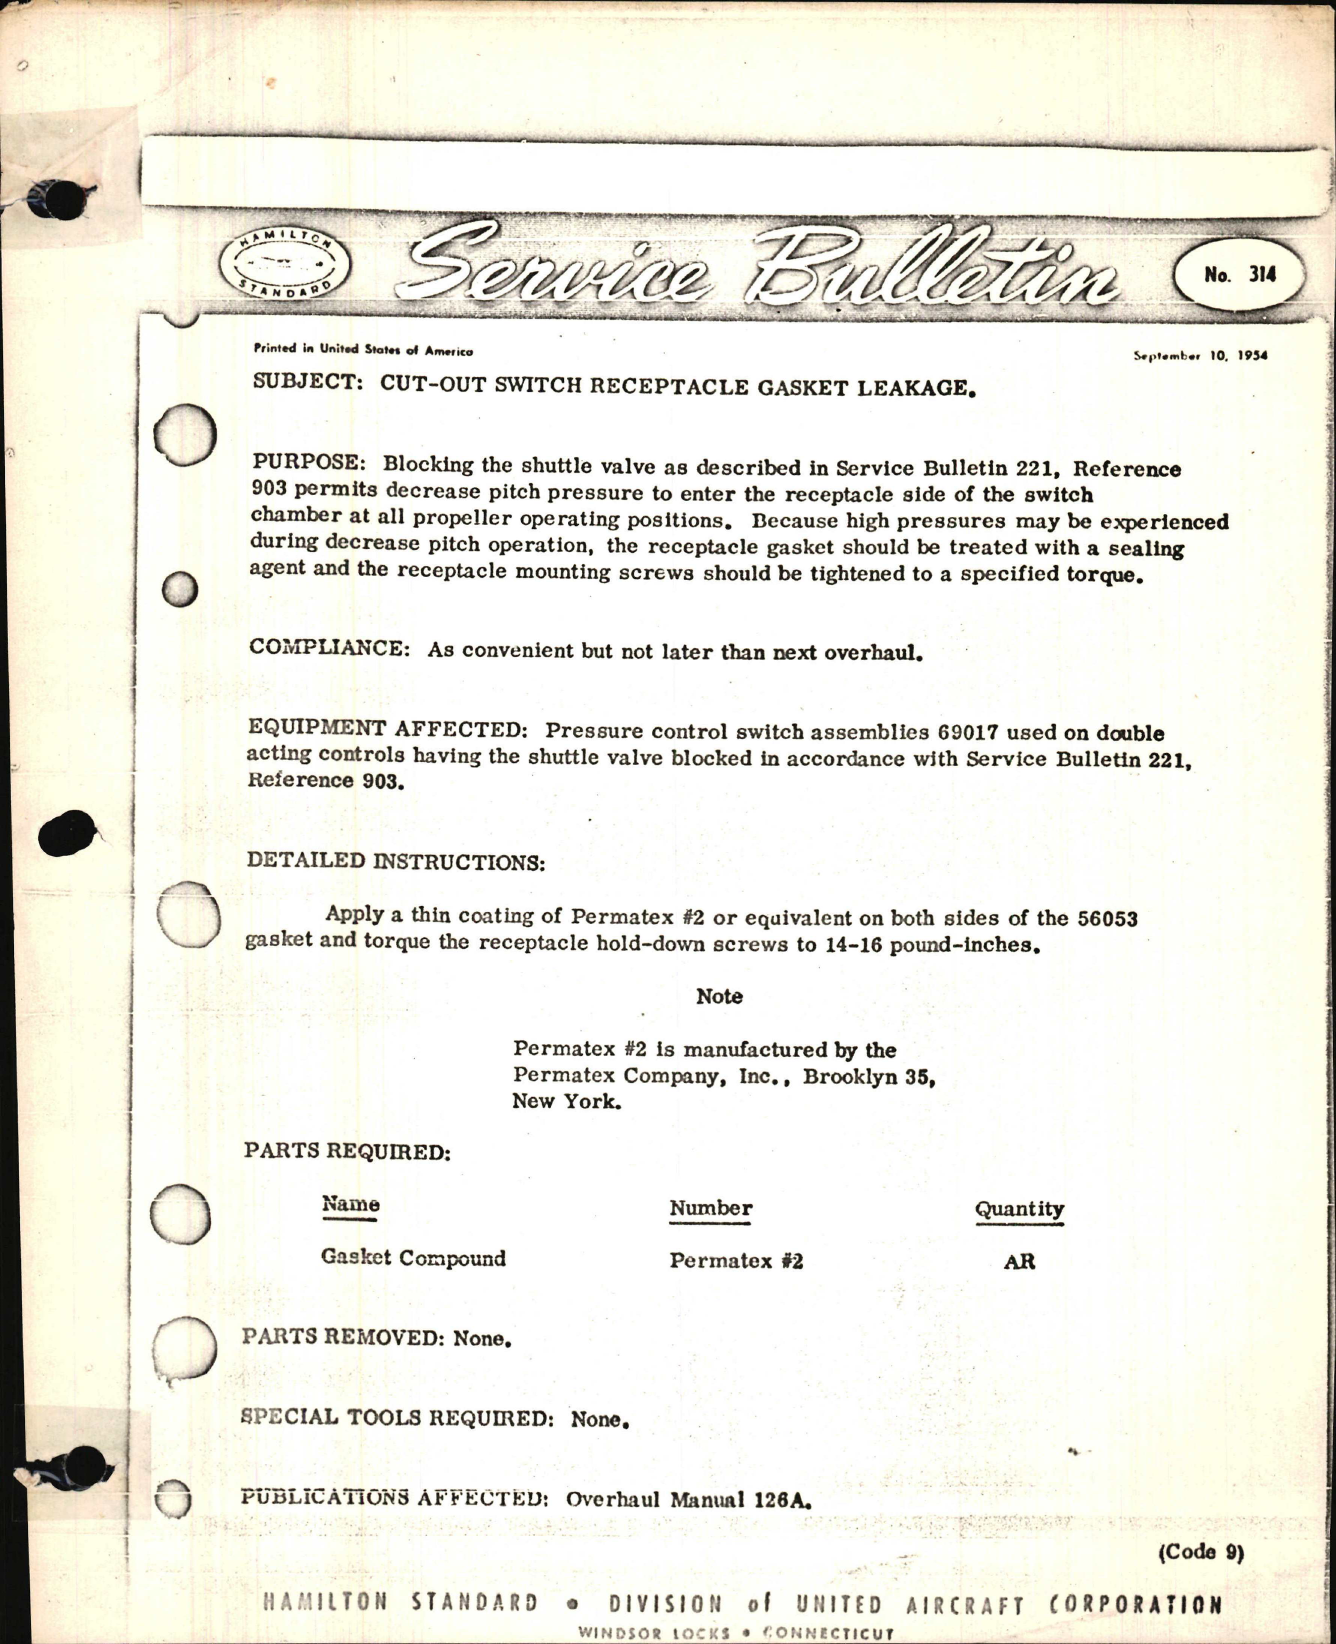 Sample page 1 from AirCorps Library document: Cut-Out Switch Receptacle Gasket Leakage